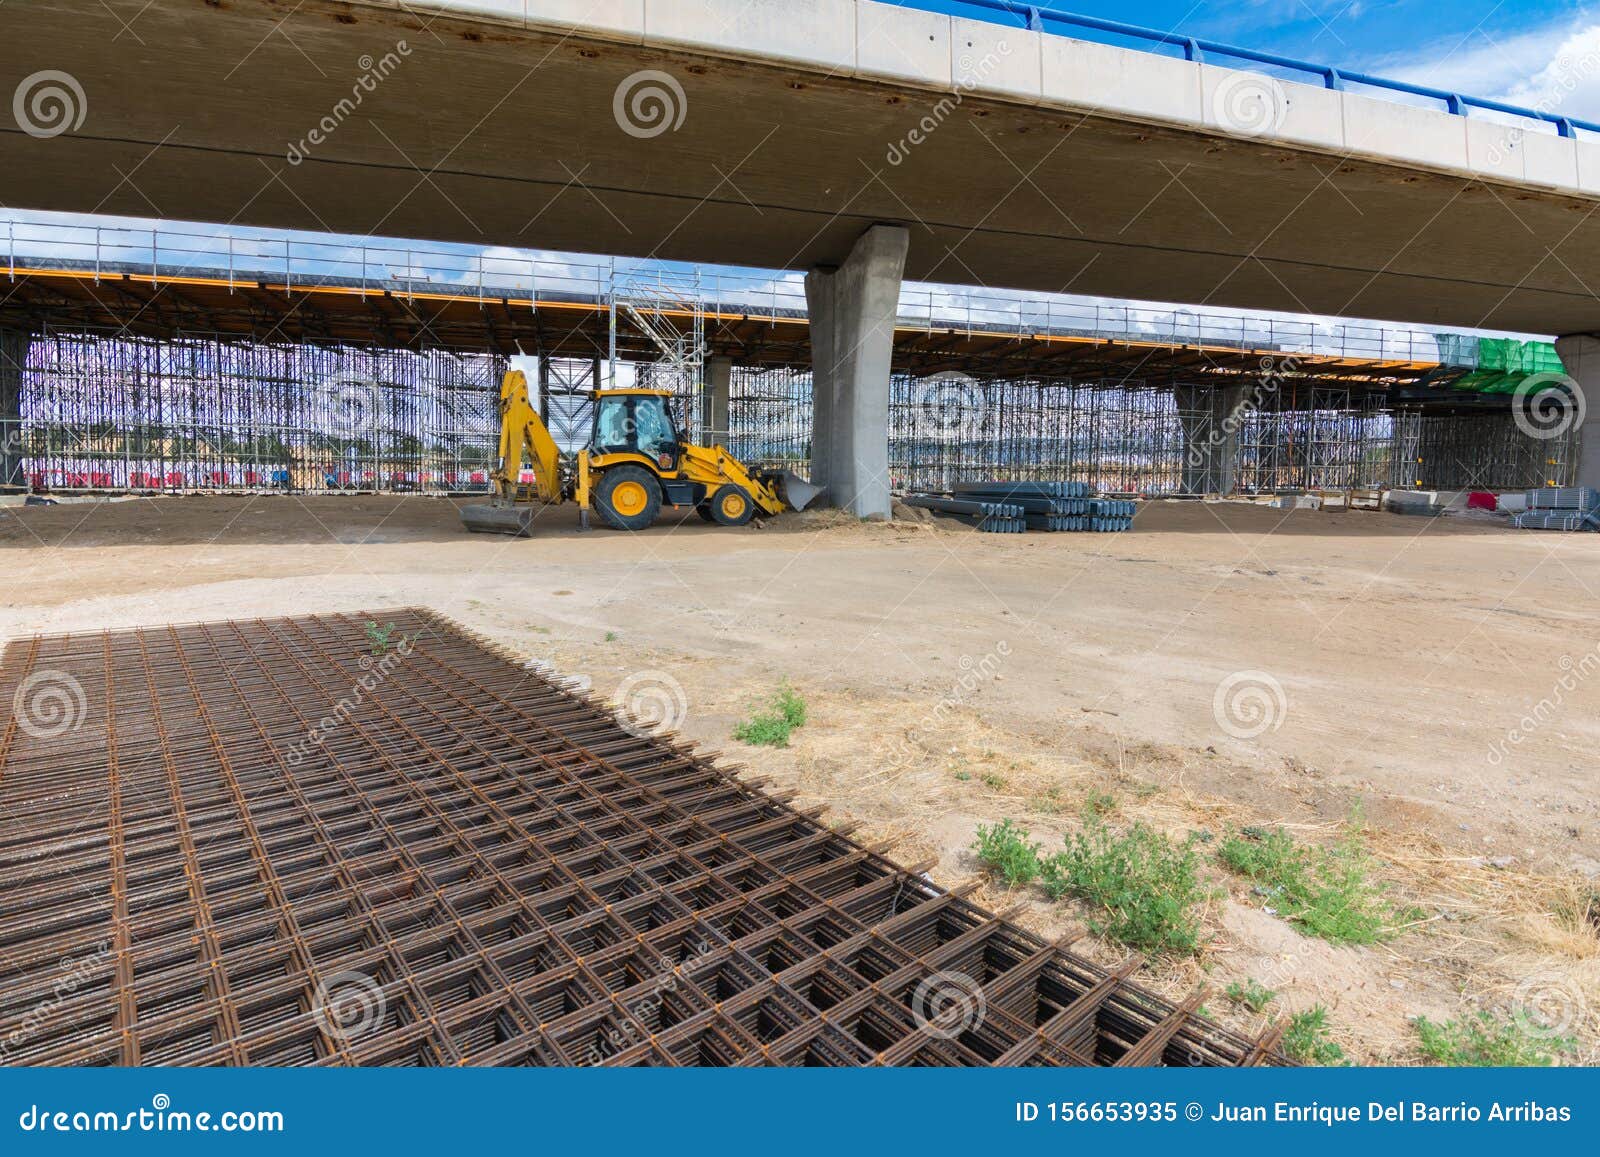 different material for the construction of an overpass on a spanish highway